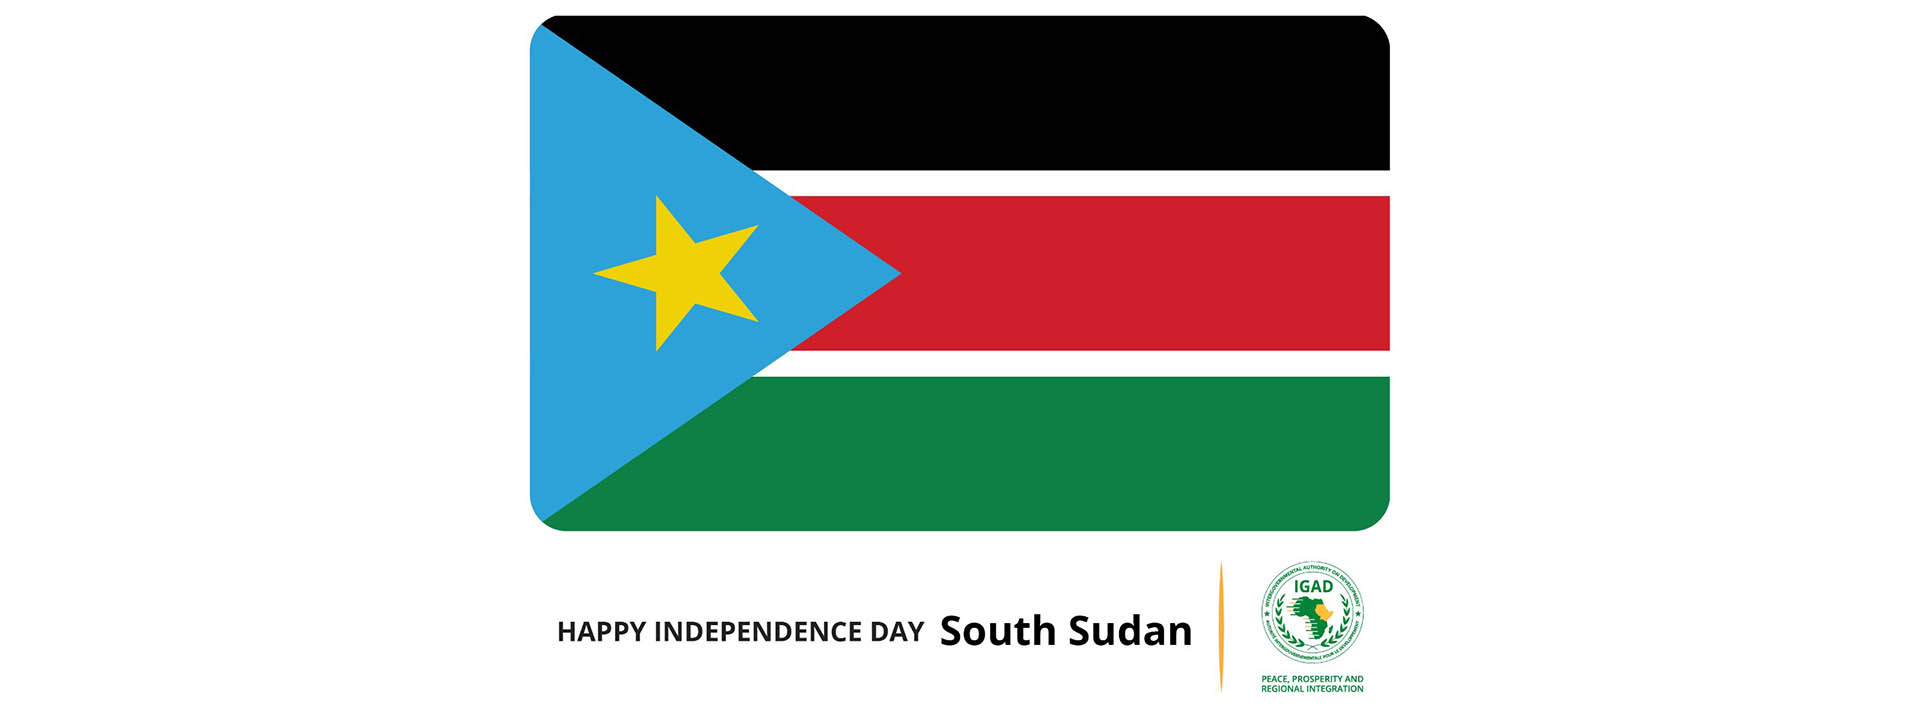 Happy Independence Day South Sudan